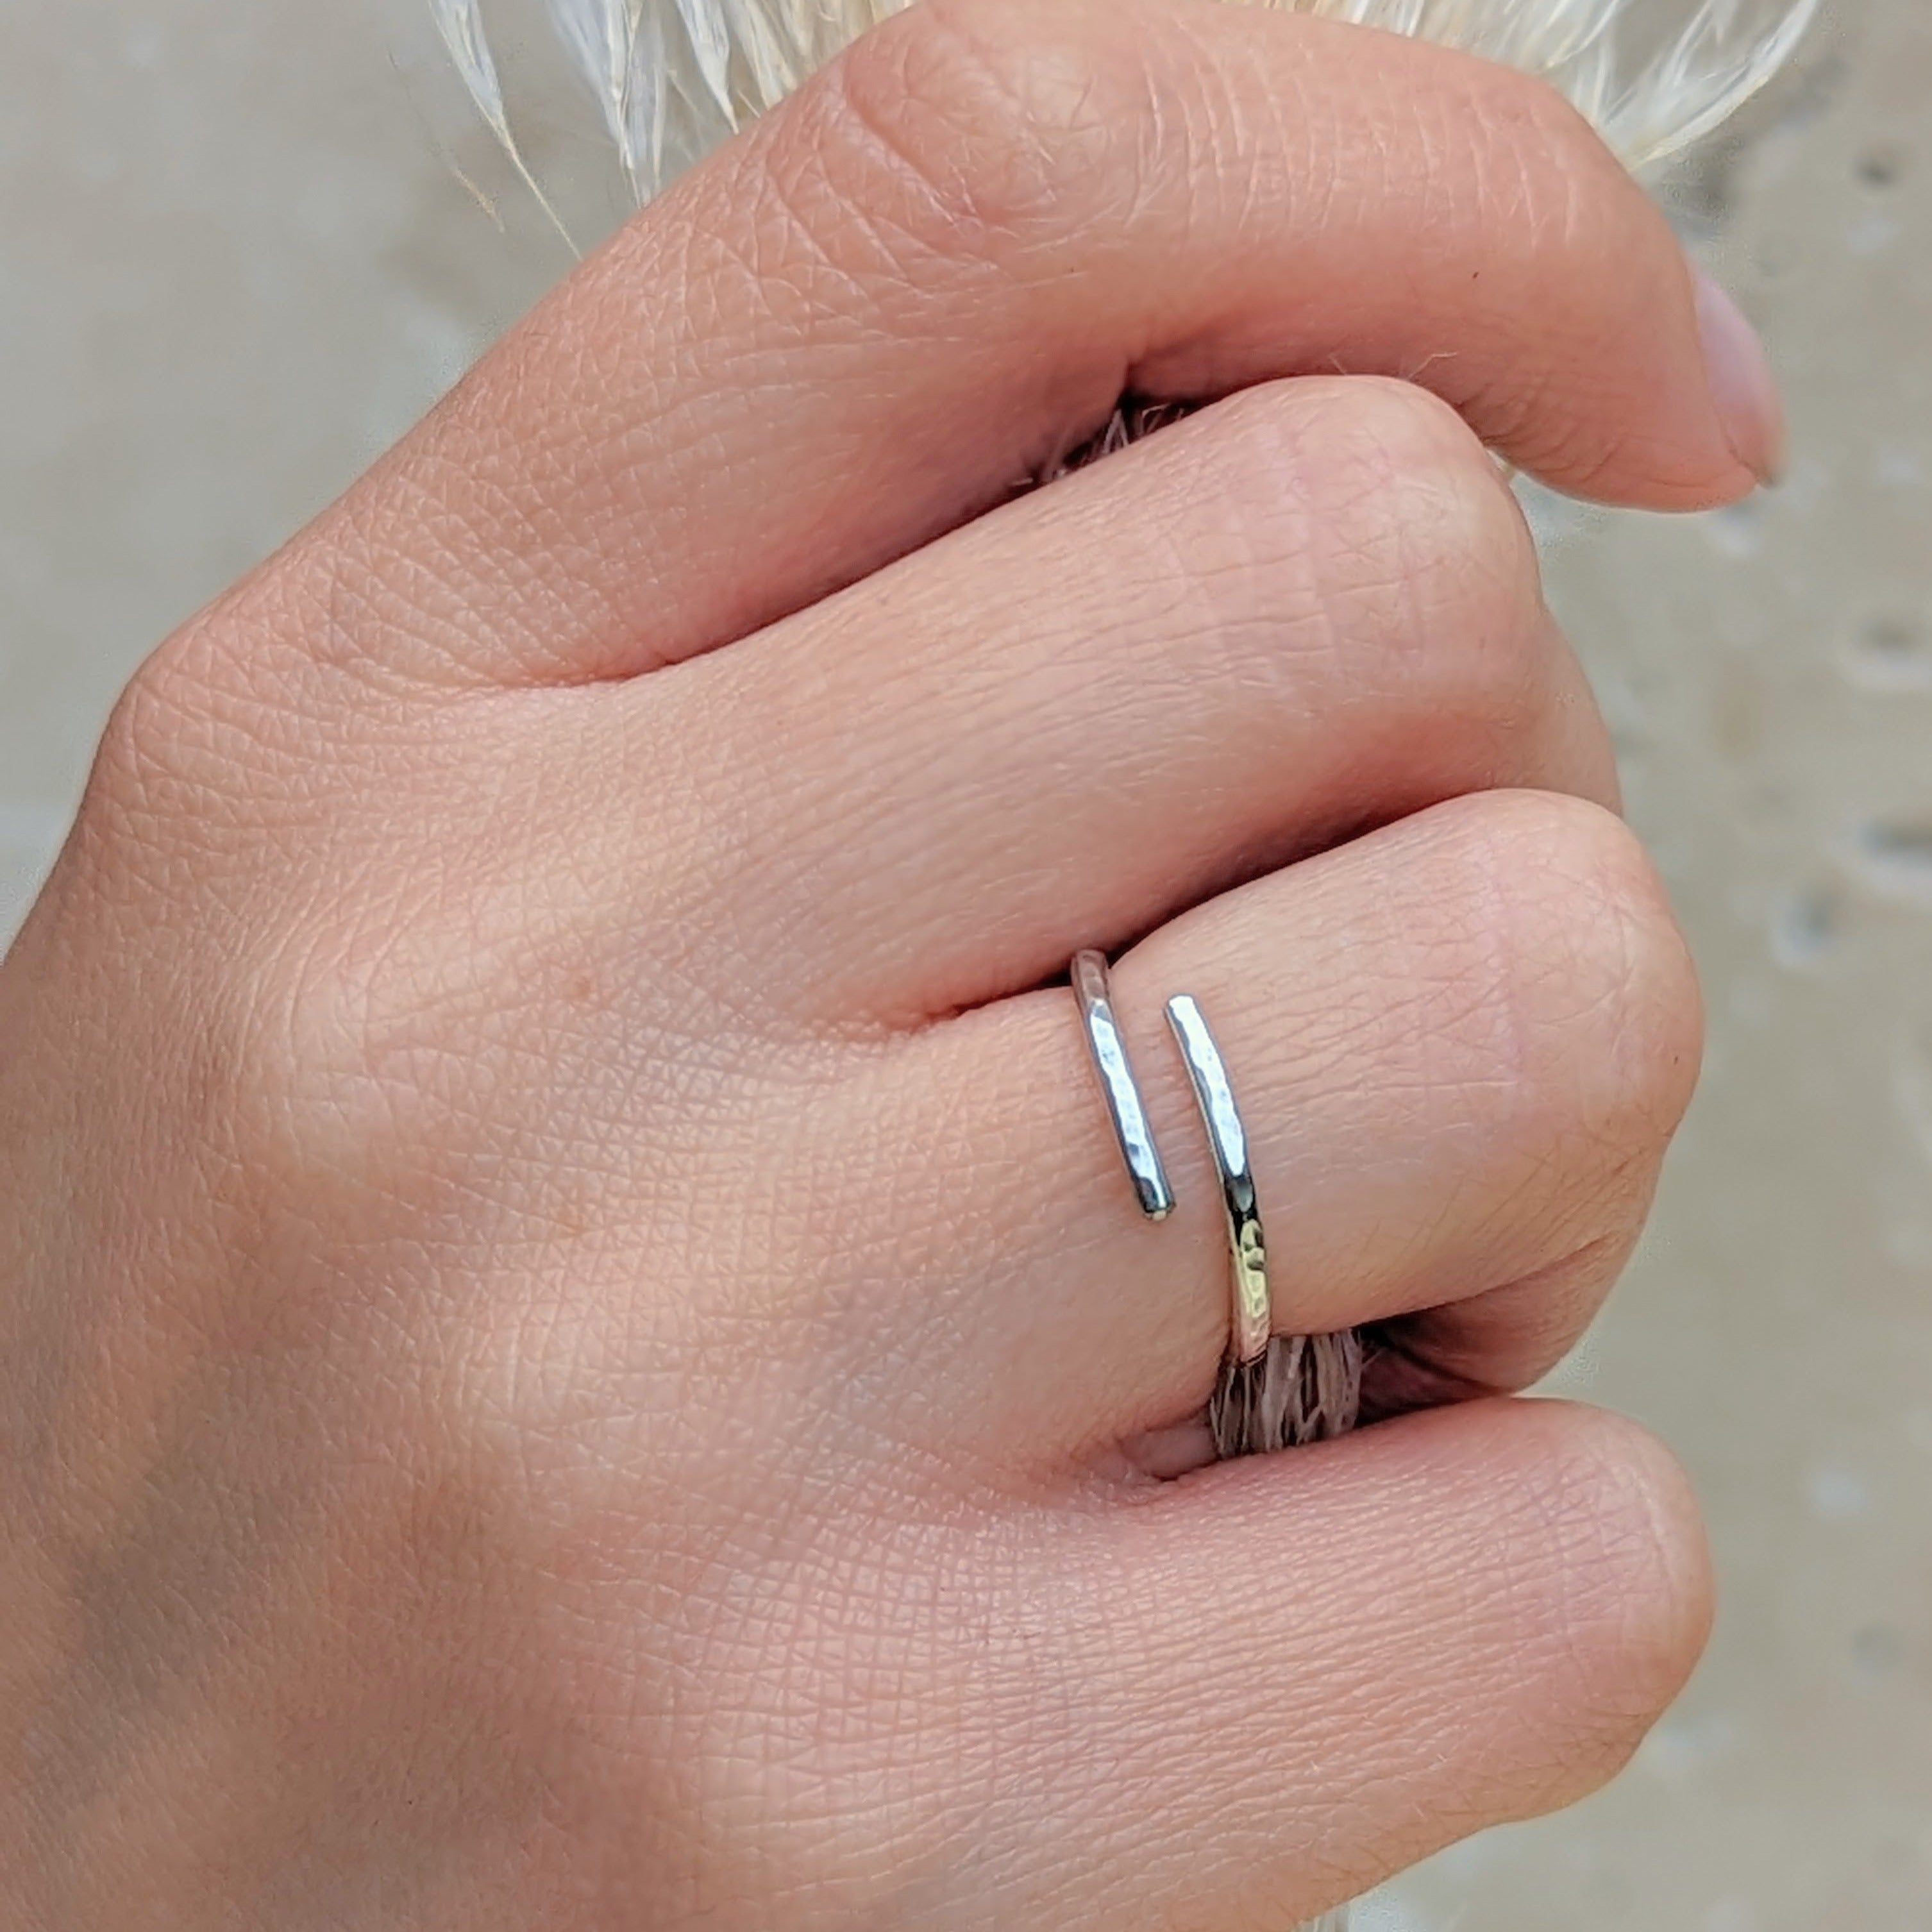 Close up of a hand holding dried florals and wearing a hammered silver adjustable ring